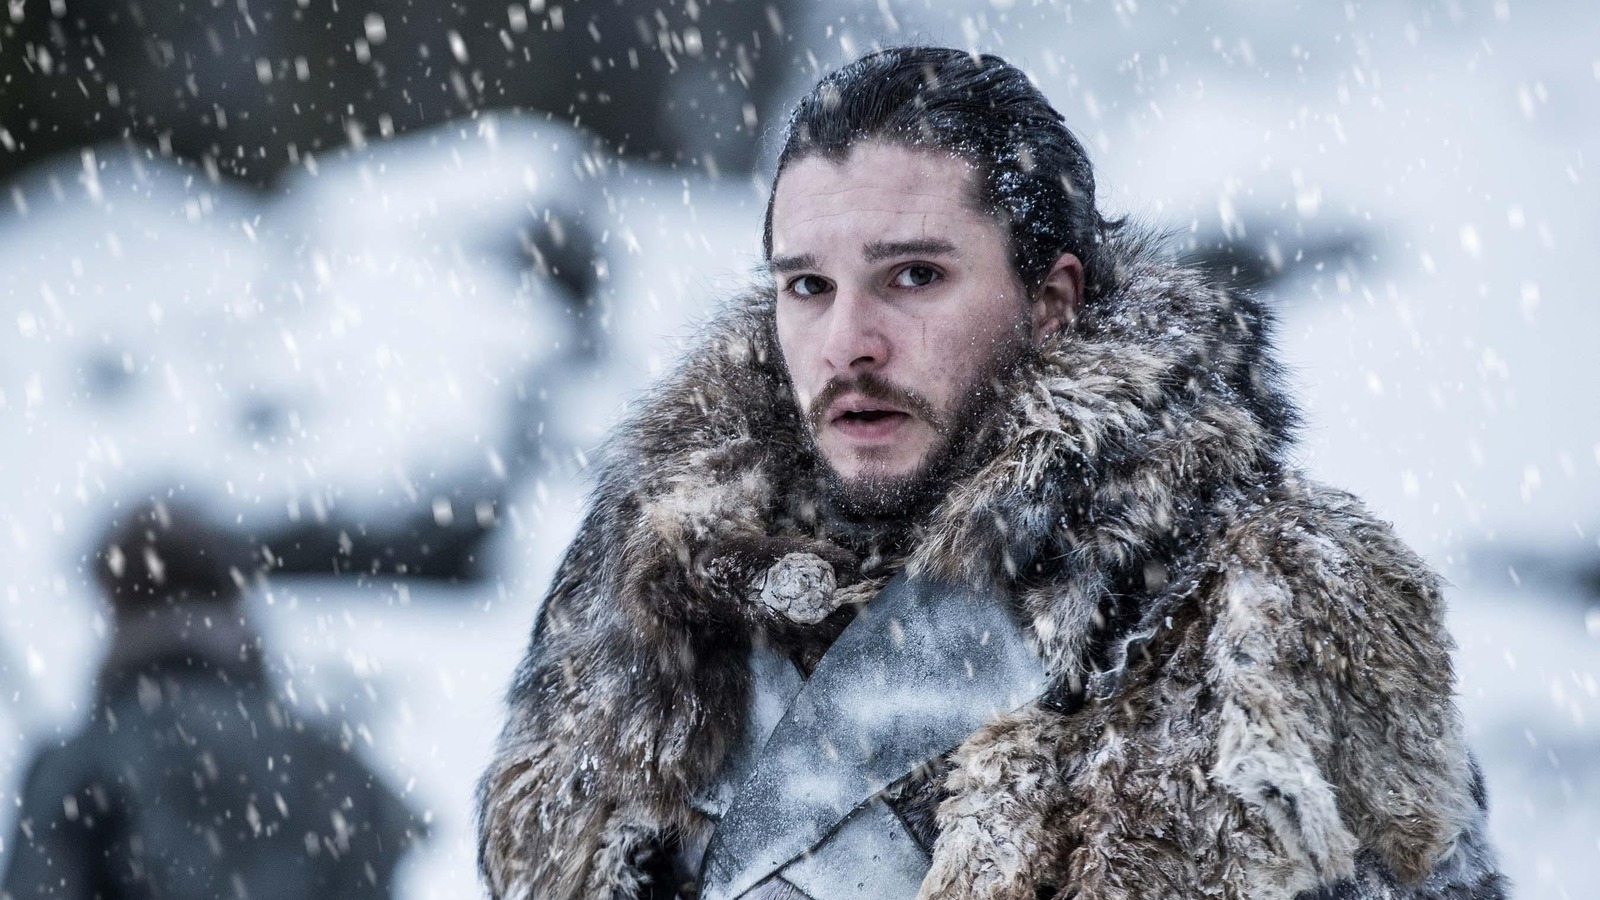 Game Of Thrones Jon Snow Spin-Off Series In The Works, Kit Harington To Reprise Role